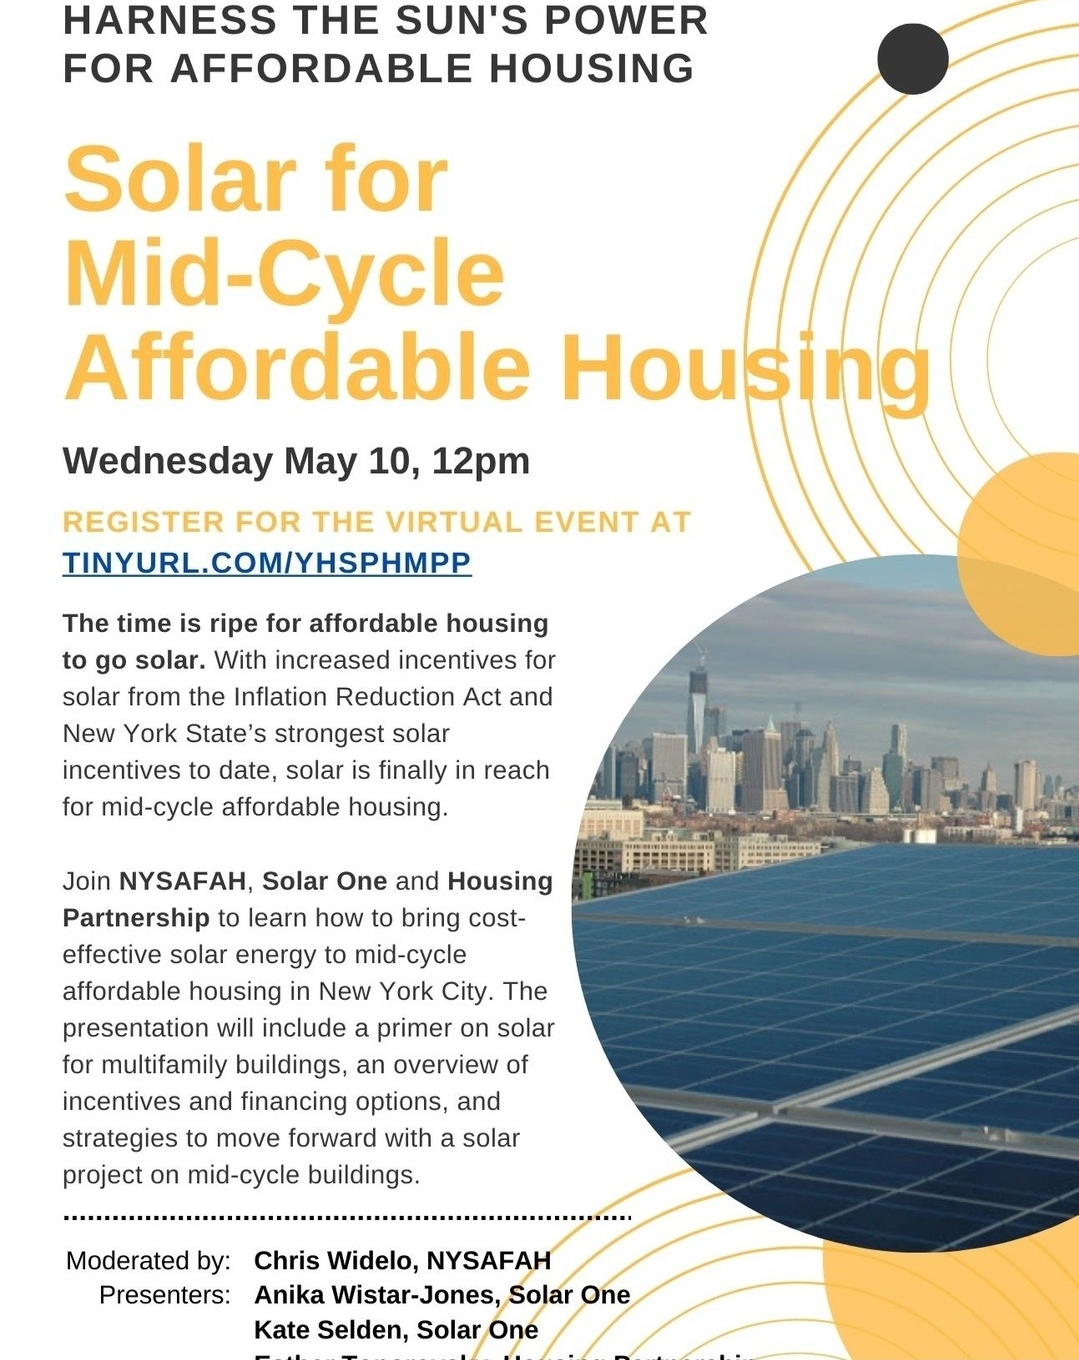 solar-for-mid-cycle-affordable-housing-harness-the-sun-s-power-for